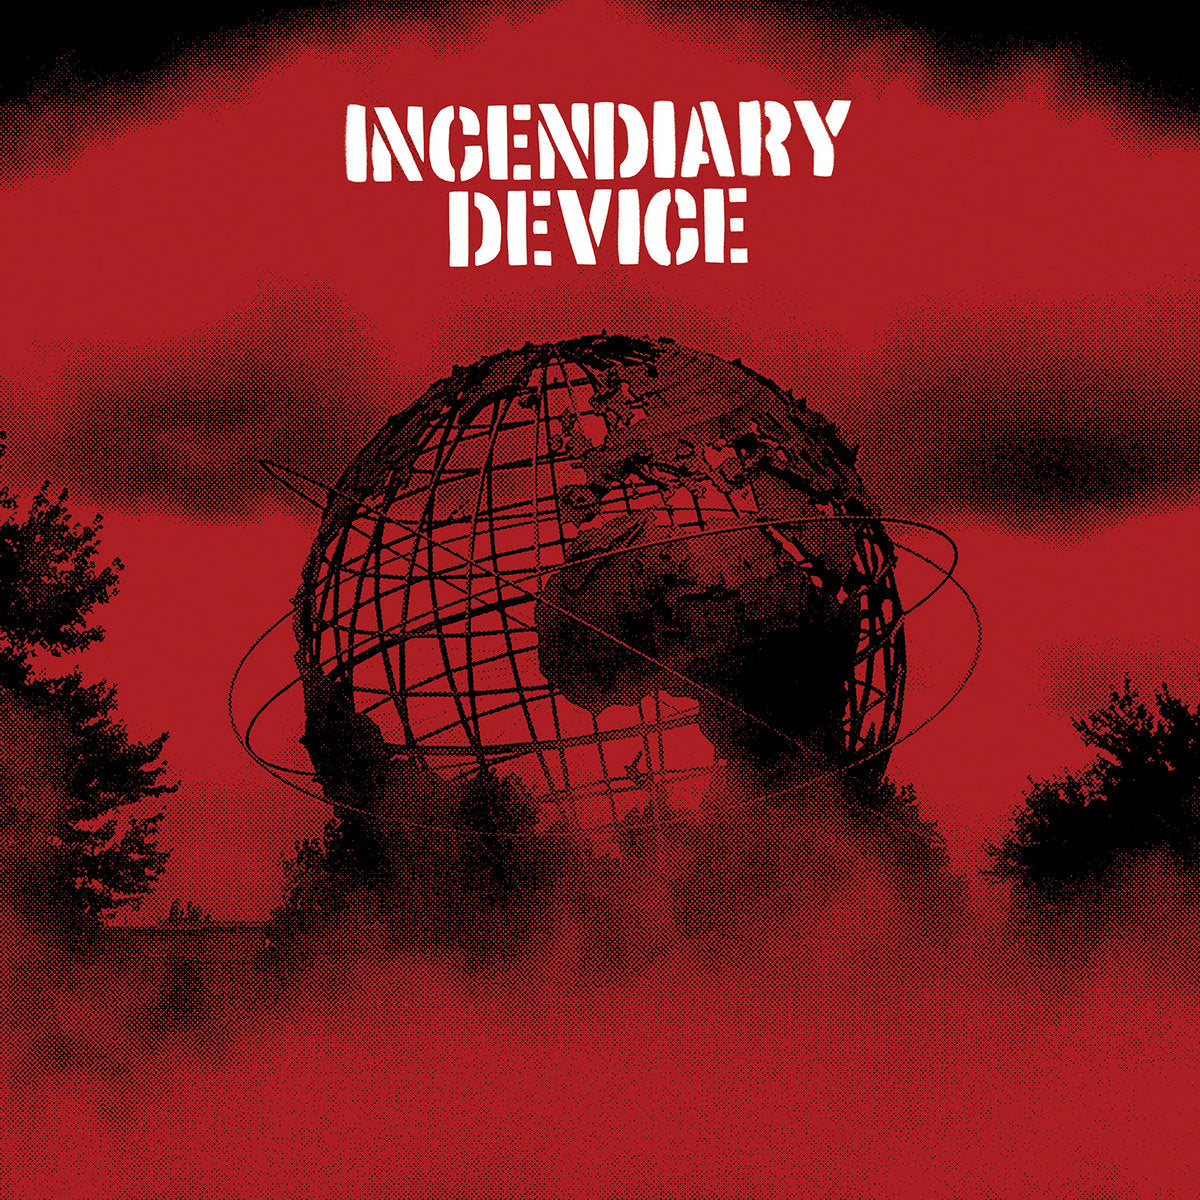 Incendiary Device "Self Titled" LP